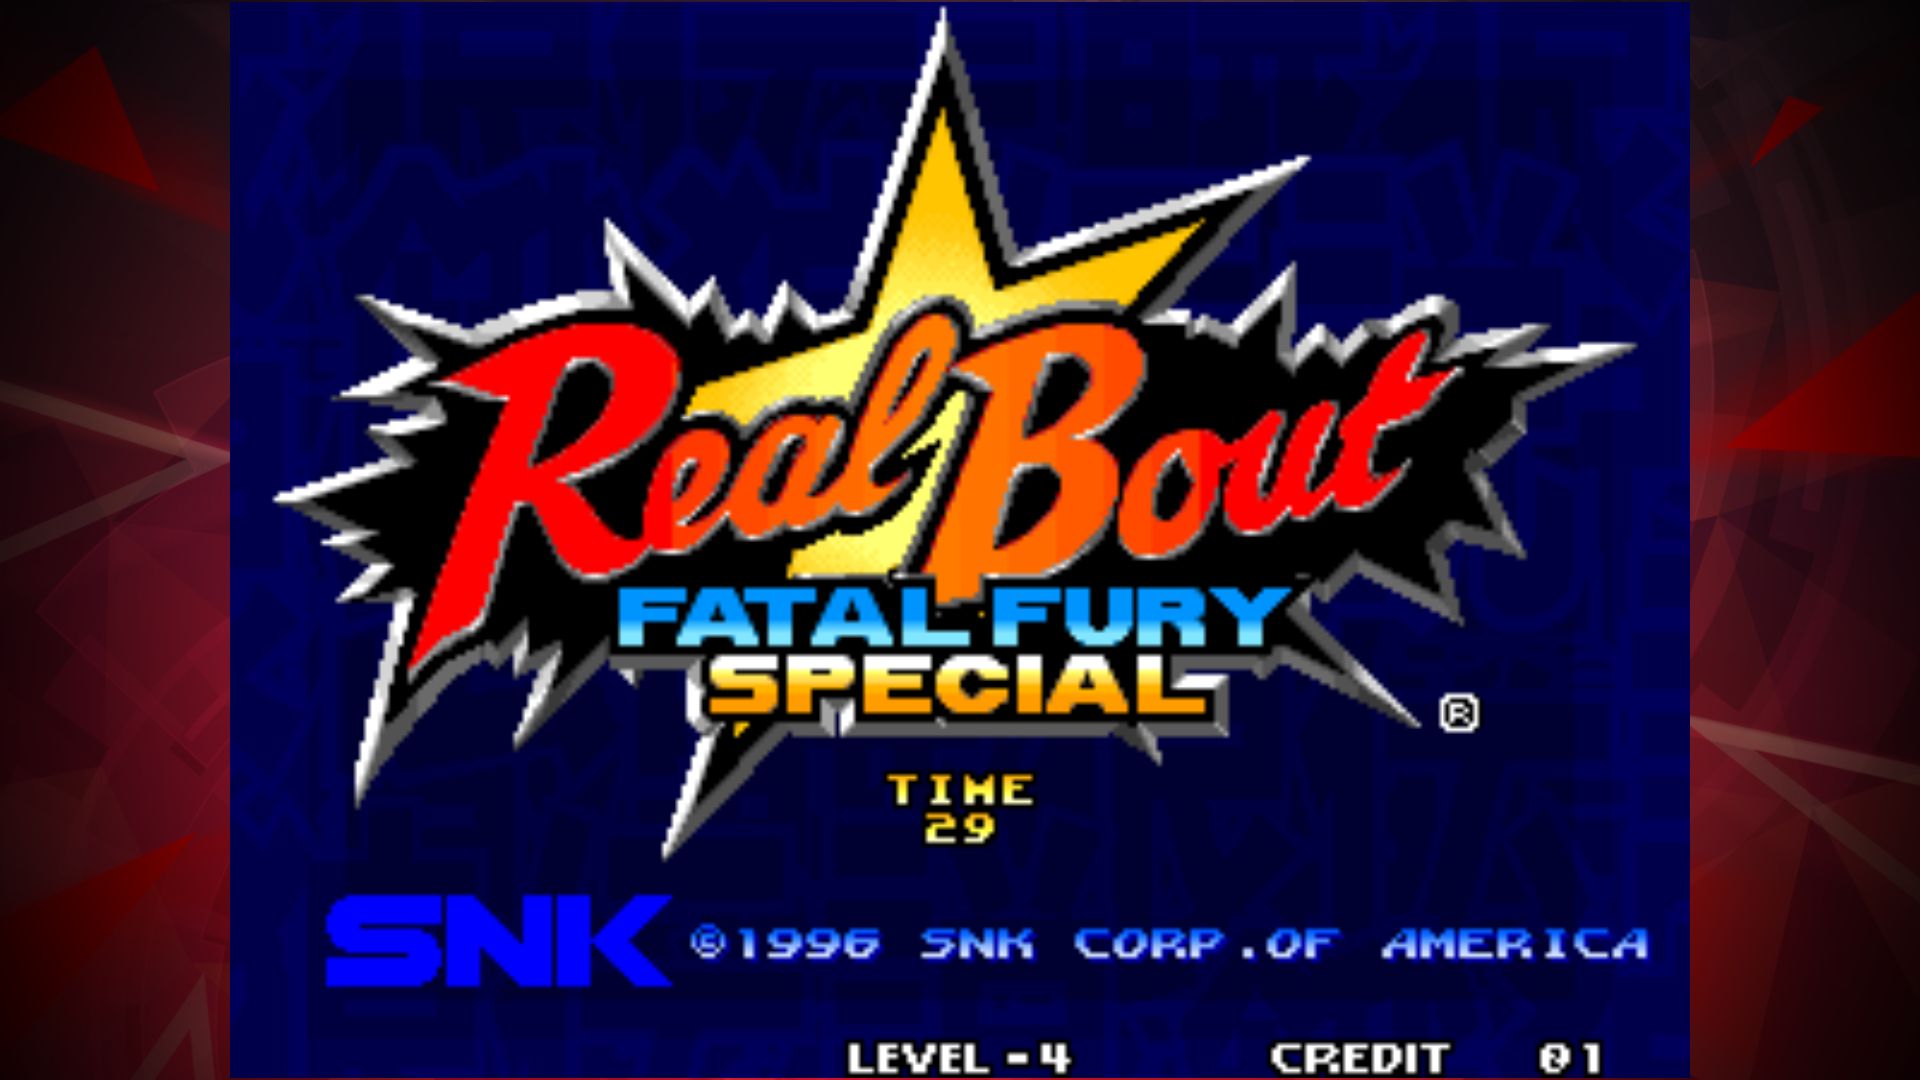 Download REAL BOUT FATAL FURY SPECIAL für Android kostenlos.